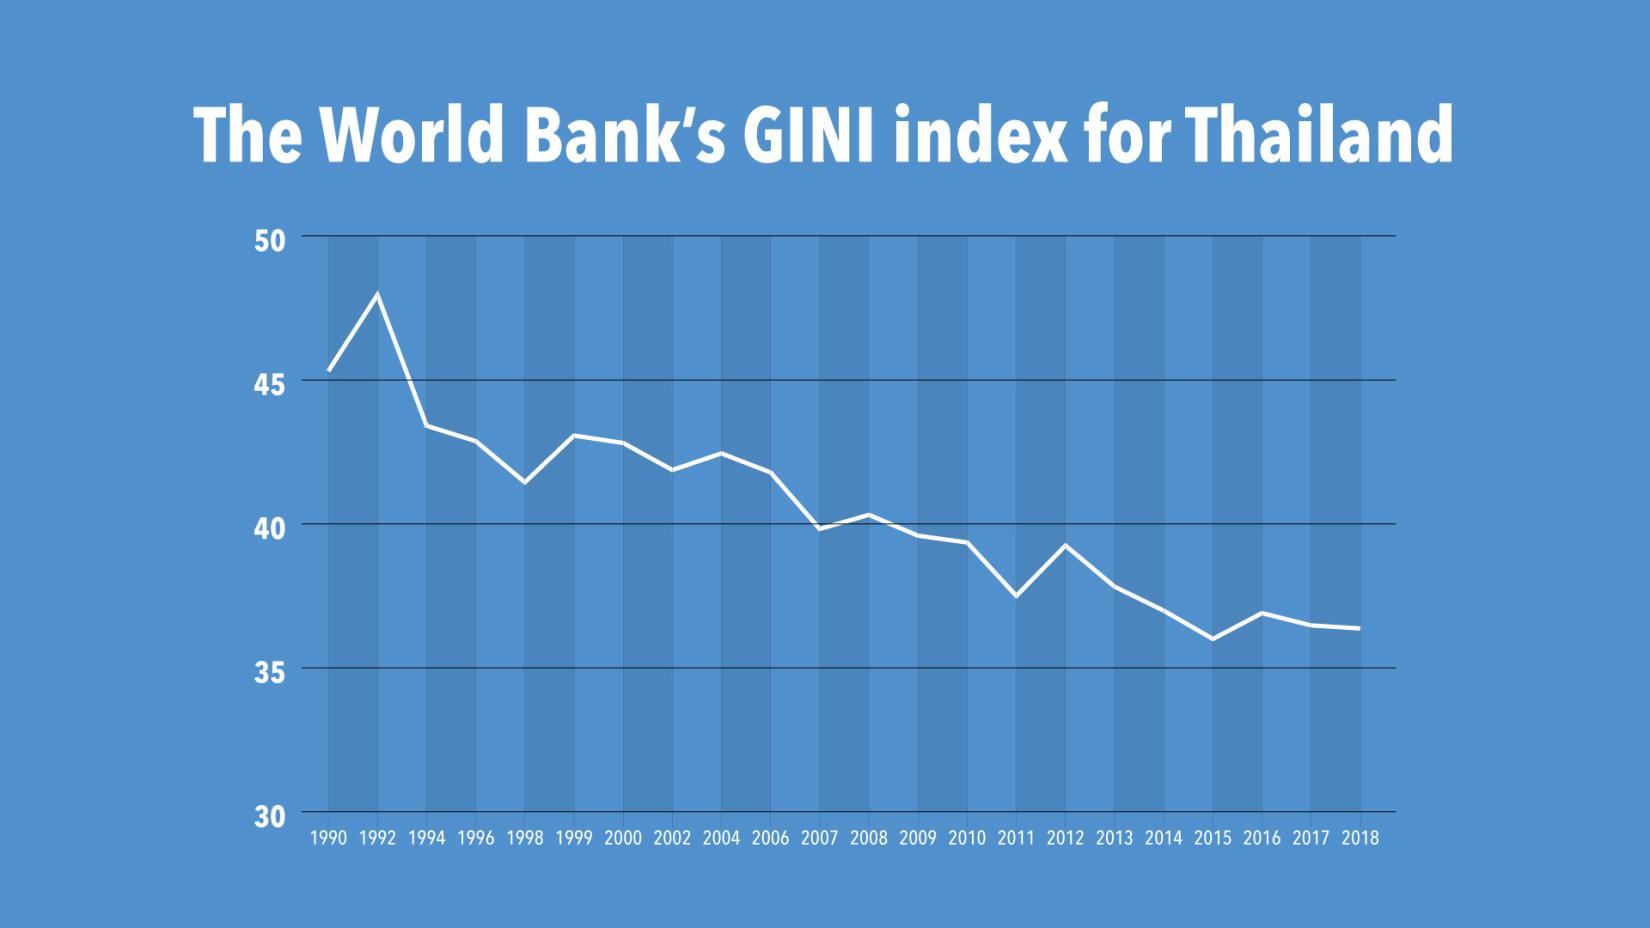 Thailand’s income inequality has shown a downward trend during the past 30 years